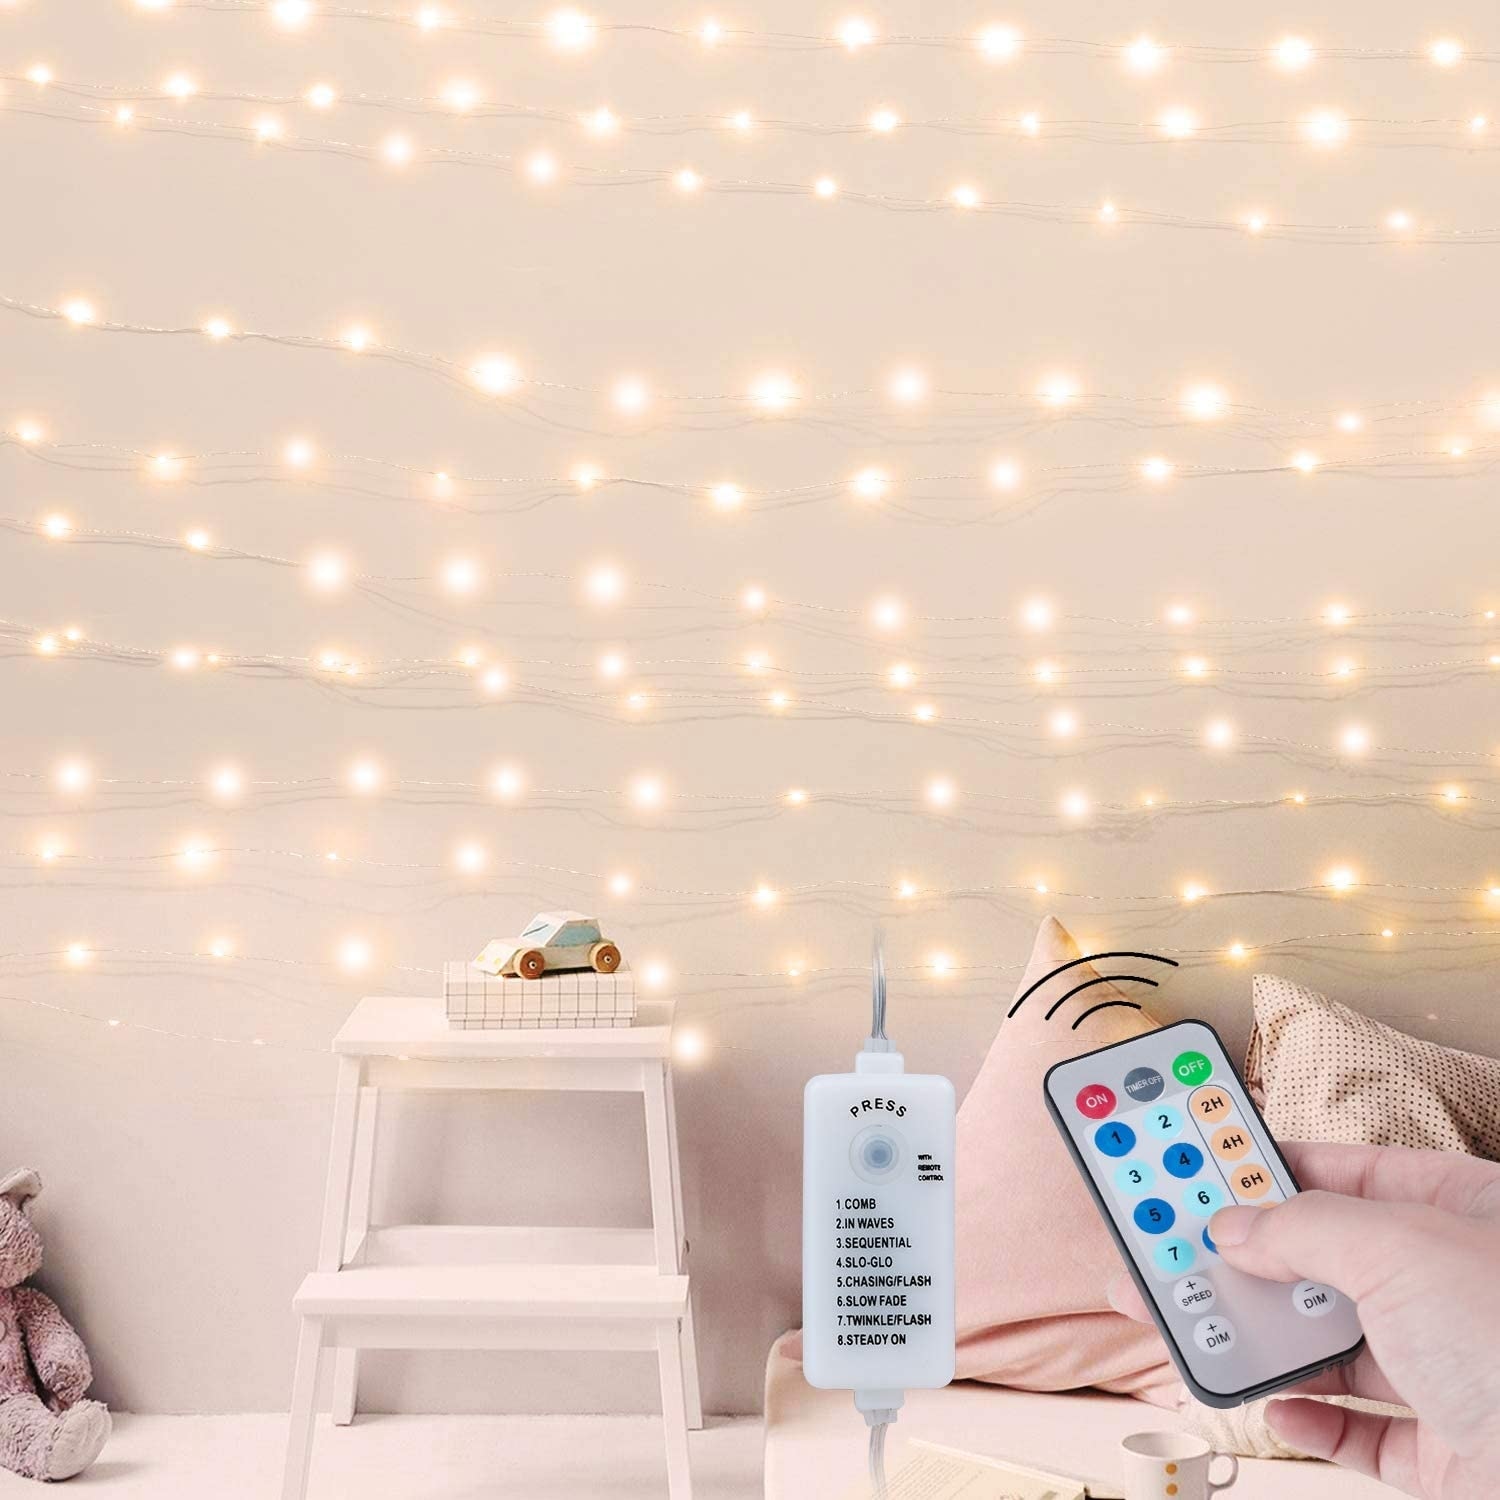 https://ak1.ostkcdn.com/images/products/is/images/direct/df71ec9b3112bcc1c28c3edeb6204e87b5fd5f93/USB-Fairy-String-Lights-with-Remote-and-Power-Adapter-66-Feet-200-Led.jpg